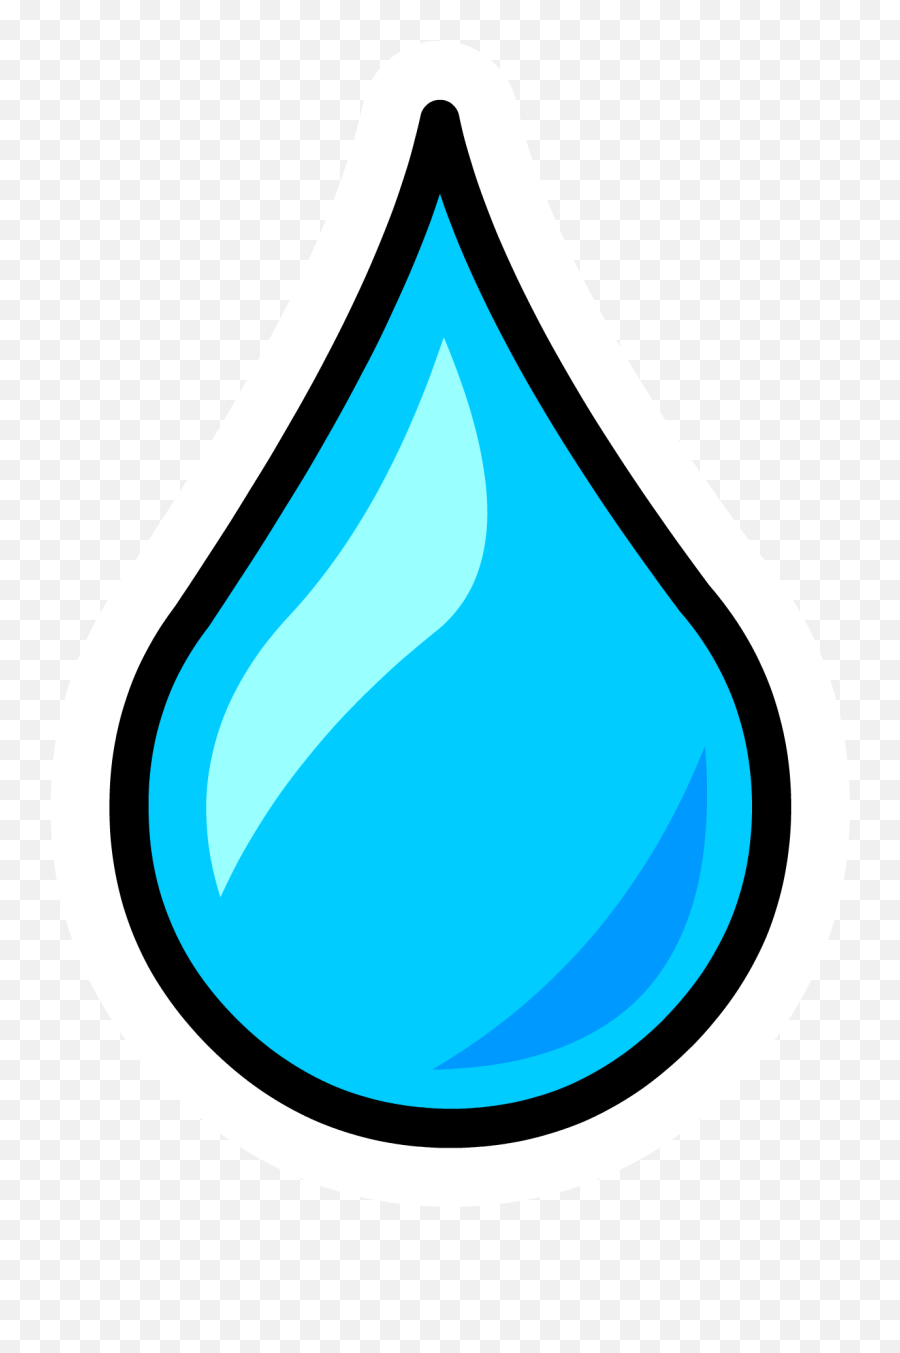 Water Droplets Png 1 Image - Water Drop Clip Art,Droplets Png